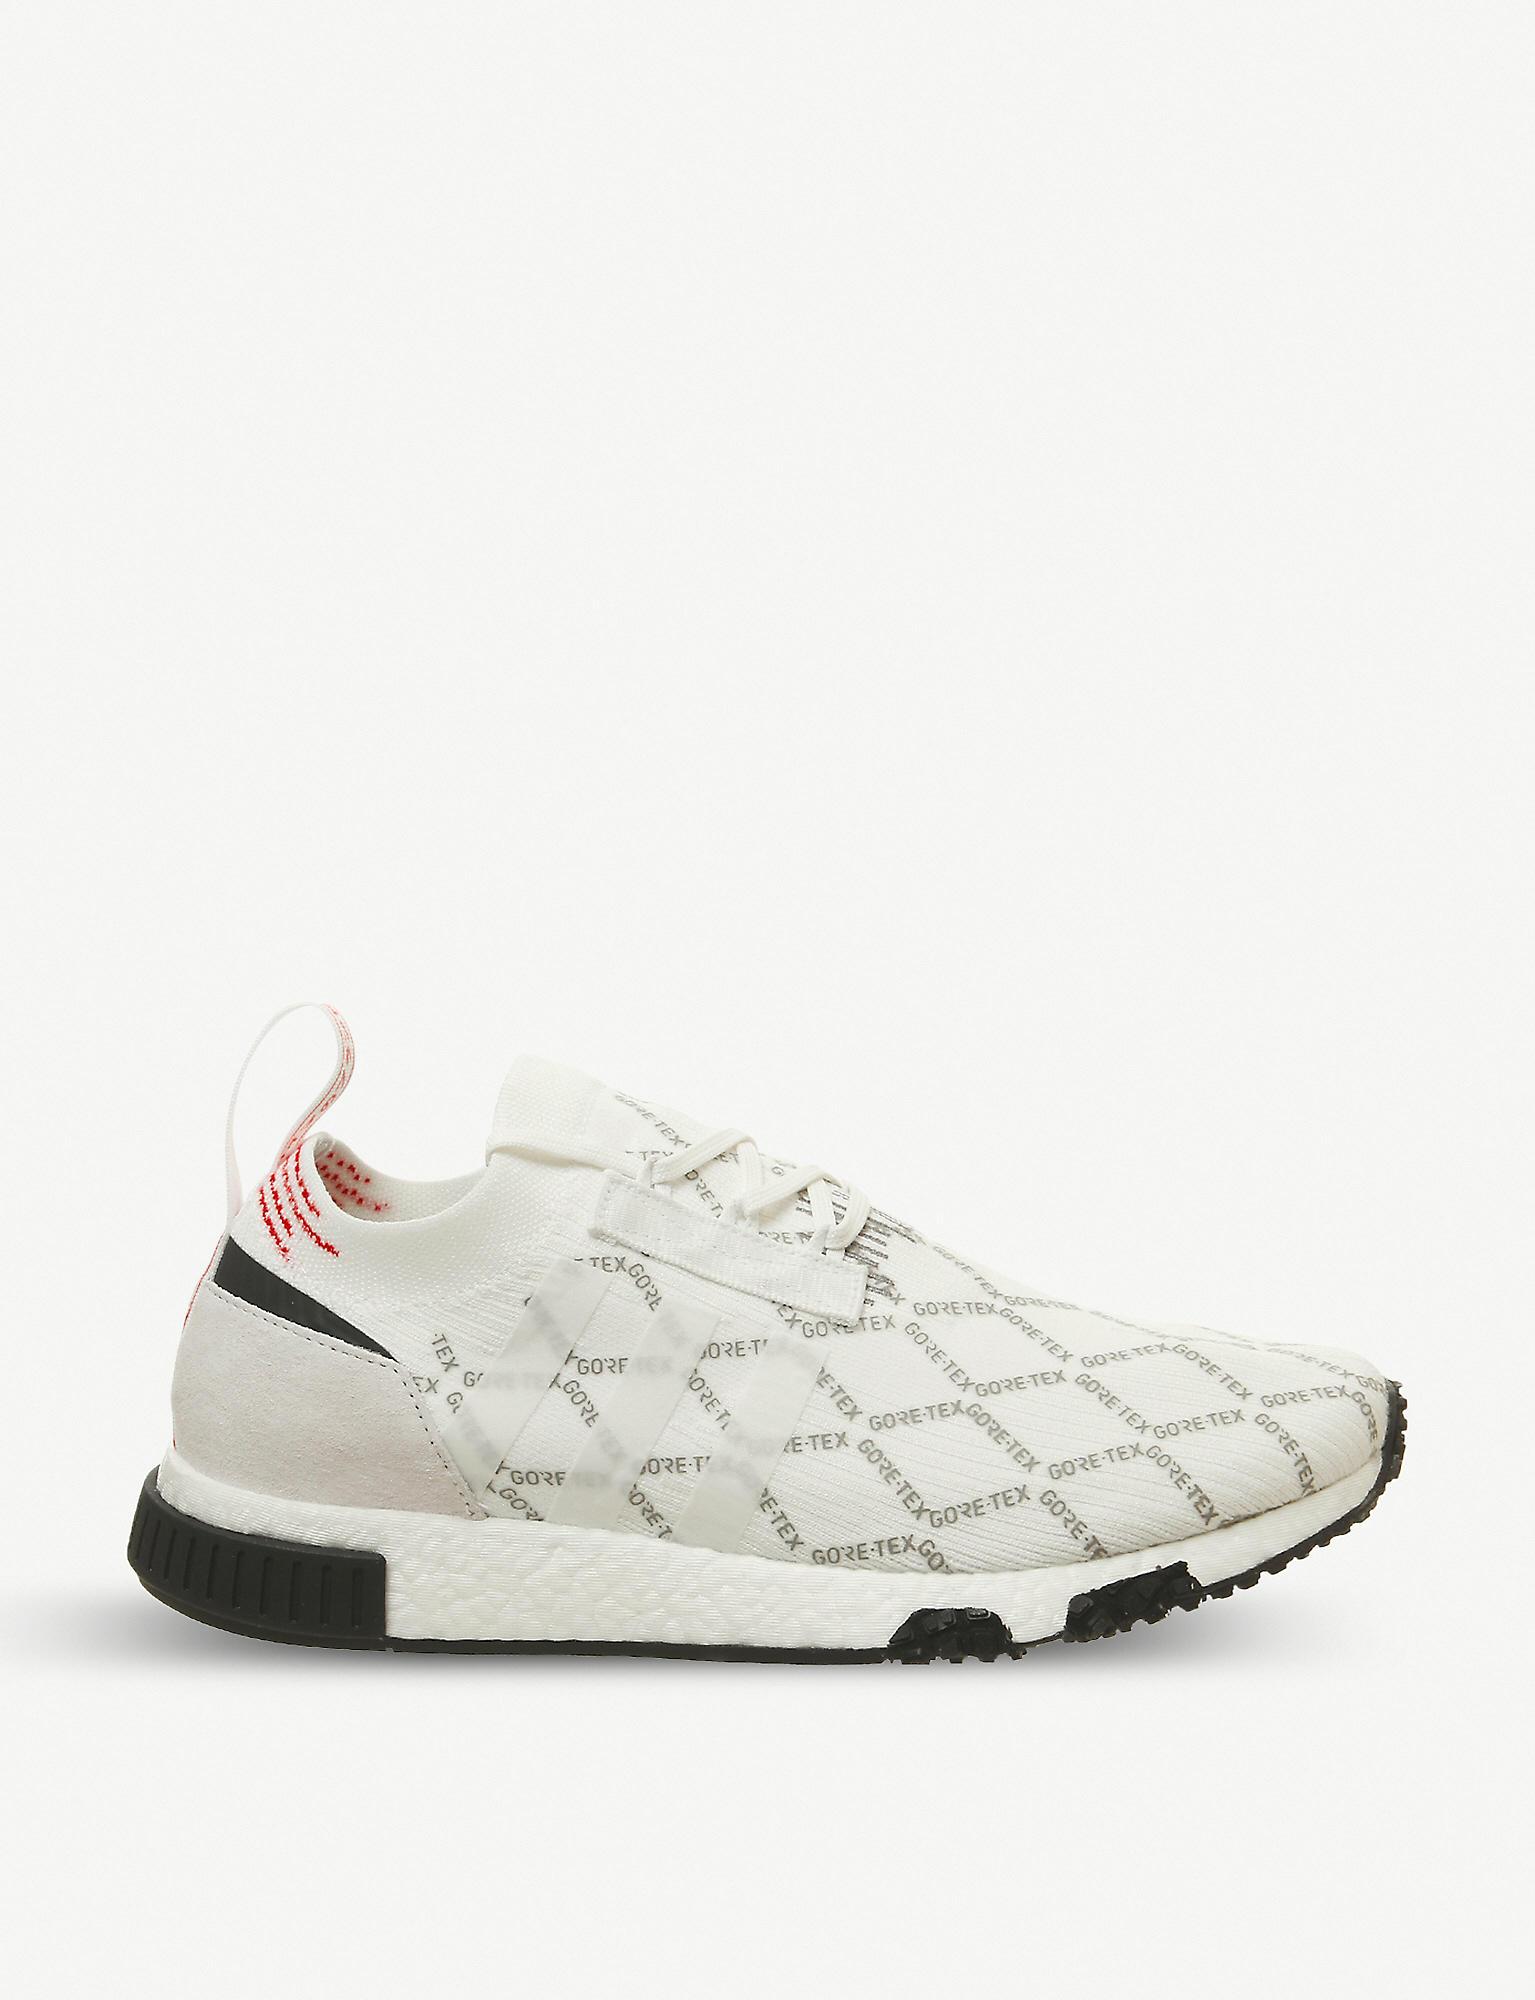 adidas Leather Nmd Racer Primeknit And Gore-tex Trainers in White for Men -  Lyst